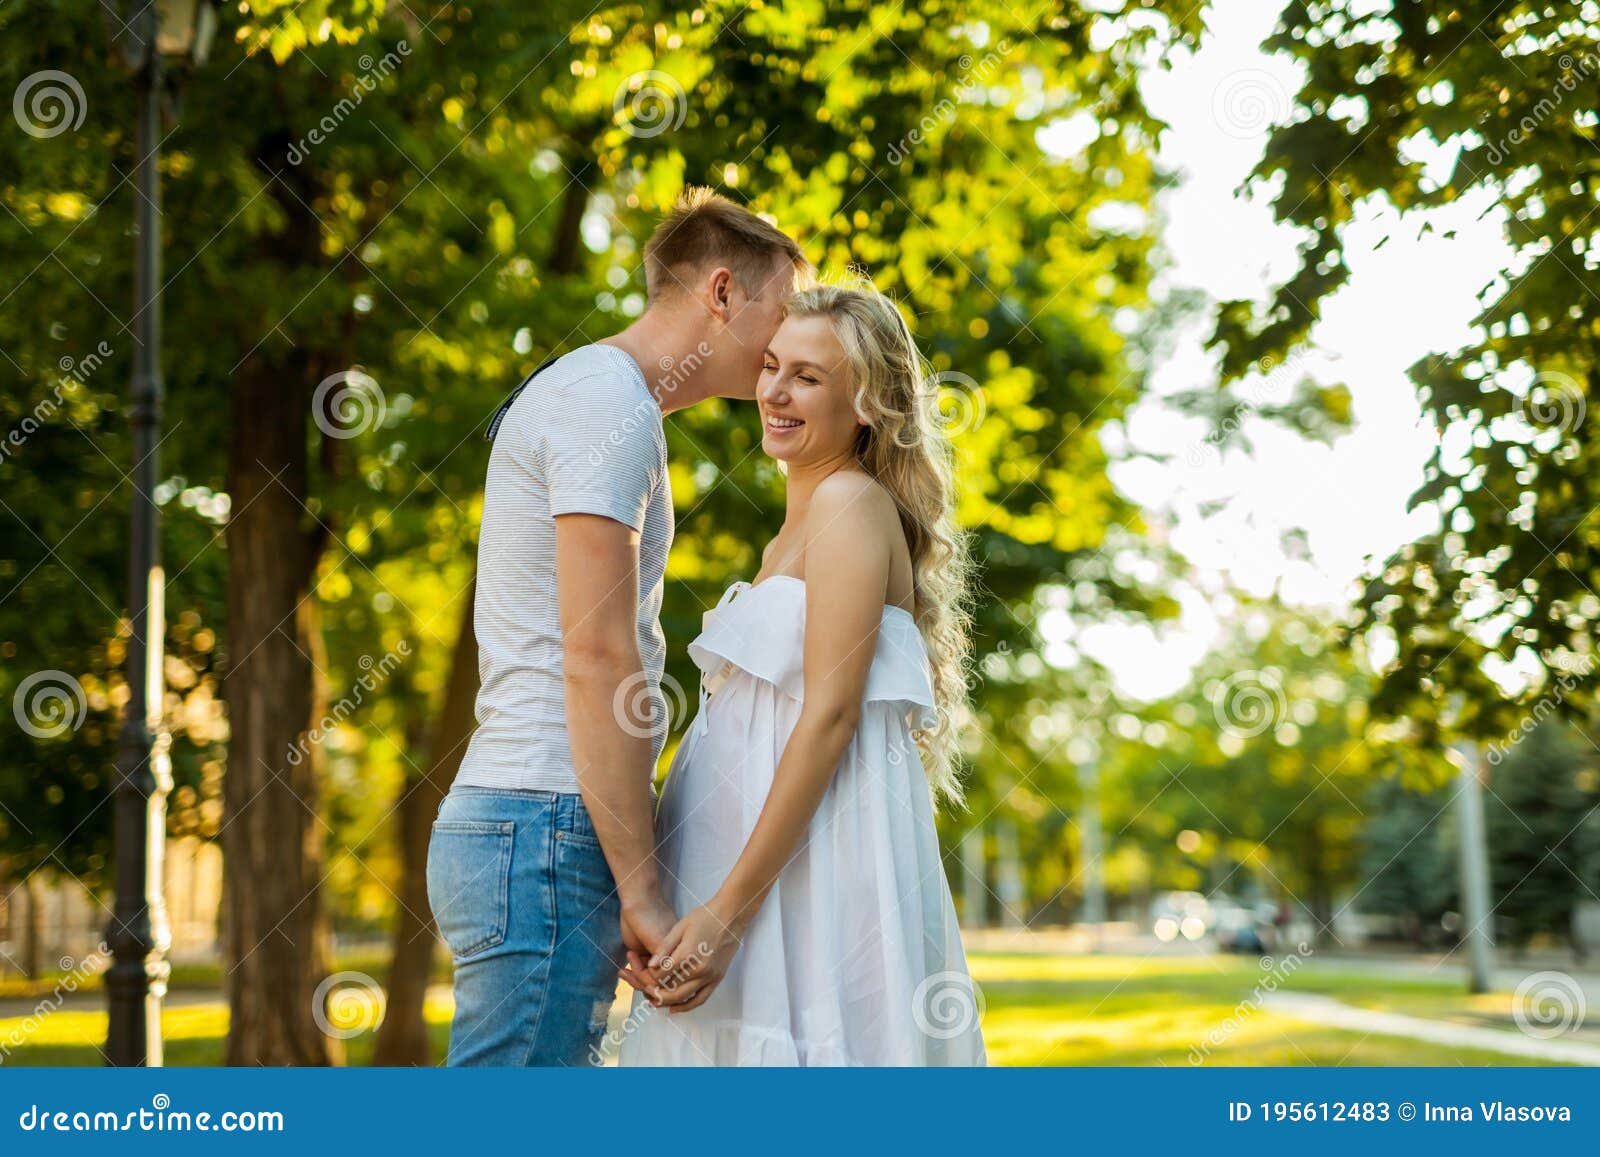 Pregnant Woman With Her Husband Walking In A Park Stock Image Image Of Outdoor Female 195612483 